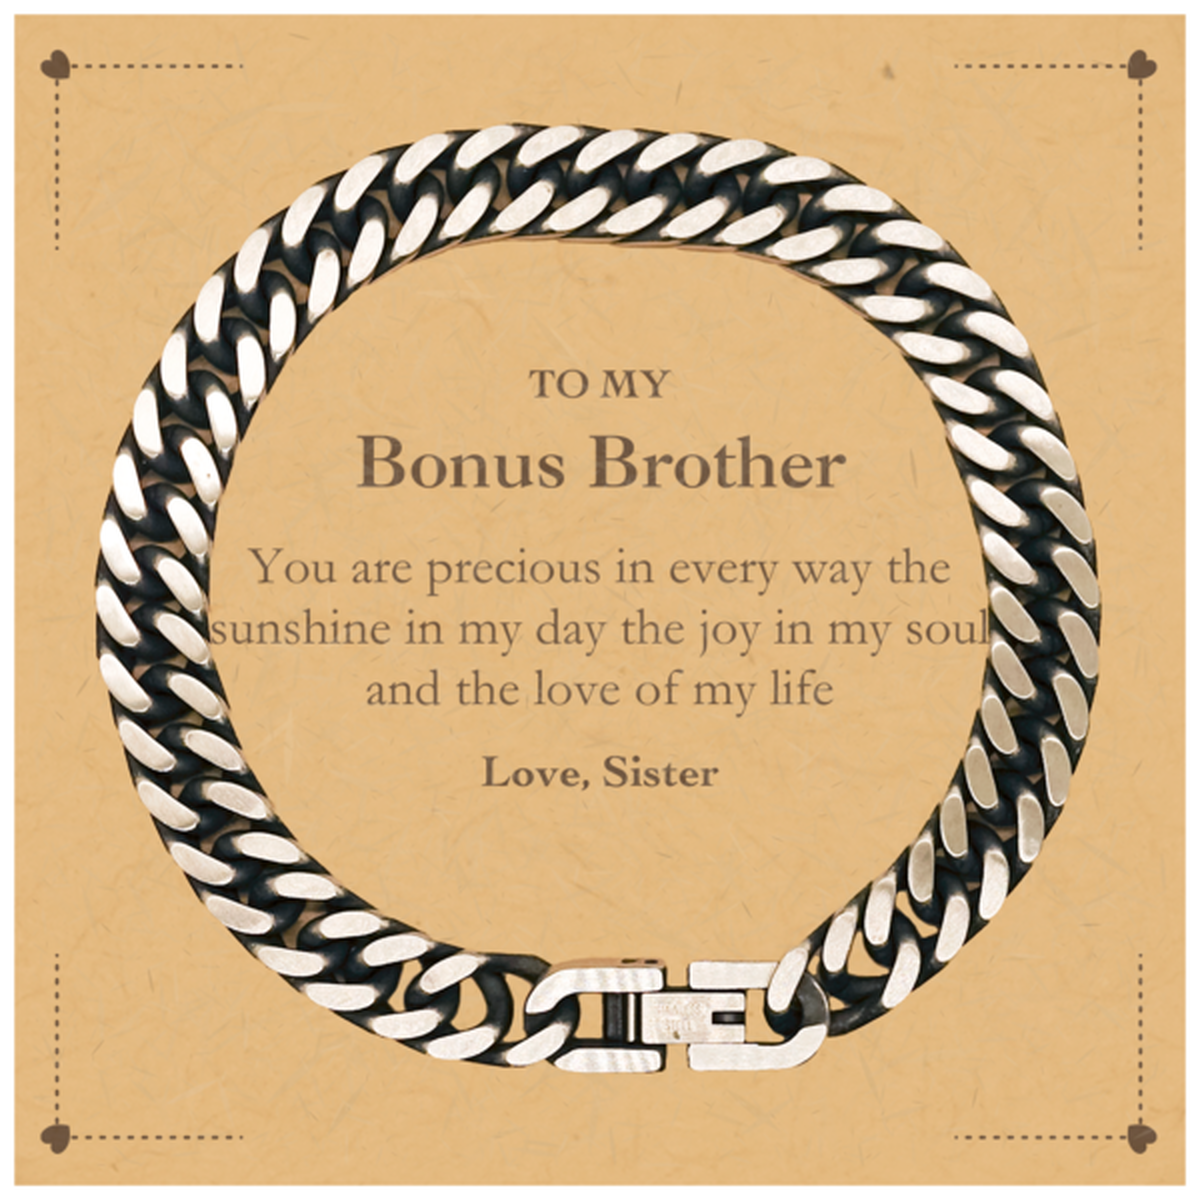 Graduation Gifts for Bonus Brother Cuban Link Chain Bracelet Present from Sister, Christmas Bonus Brother Birthday Gifts Bonus Brother You are precious in every way the sunshine in my day. Love, Sister